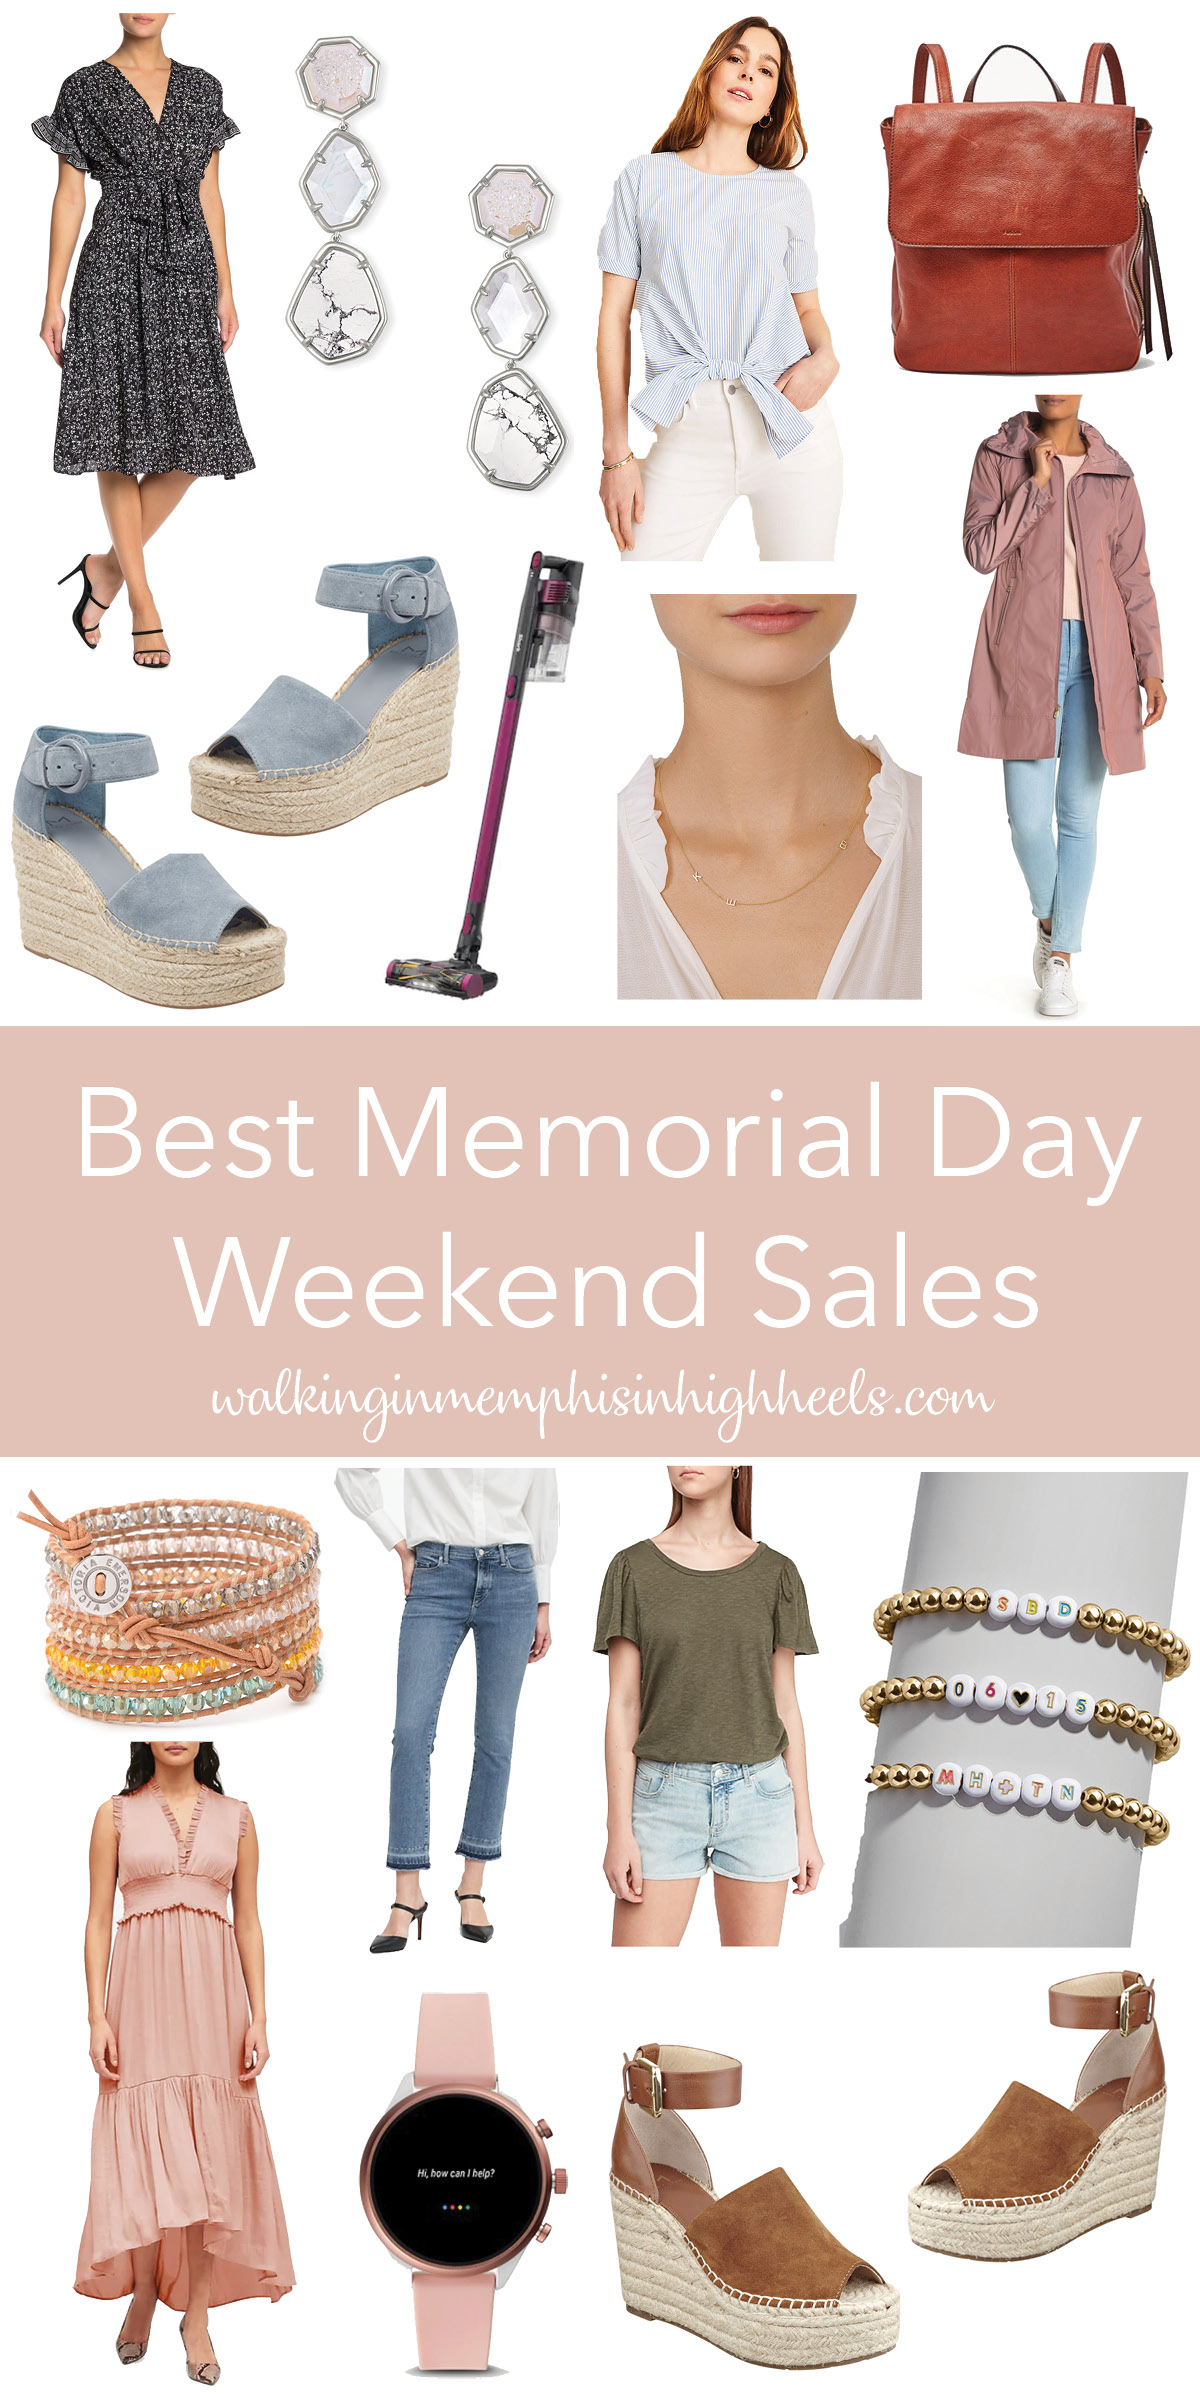 The Best Memorial Day Weekend Sales featured by top Memphis fashion blog, Walking in Memphis in High Heels.